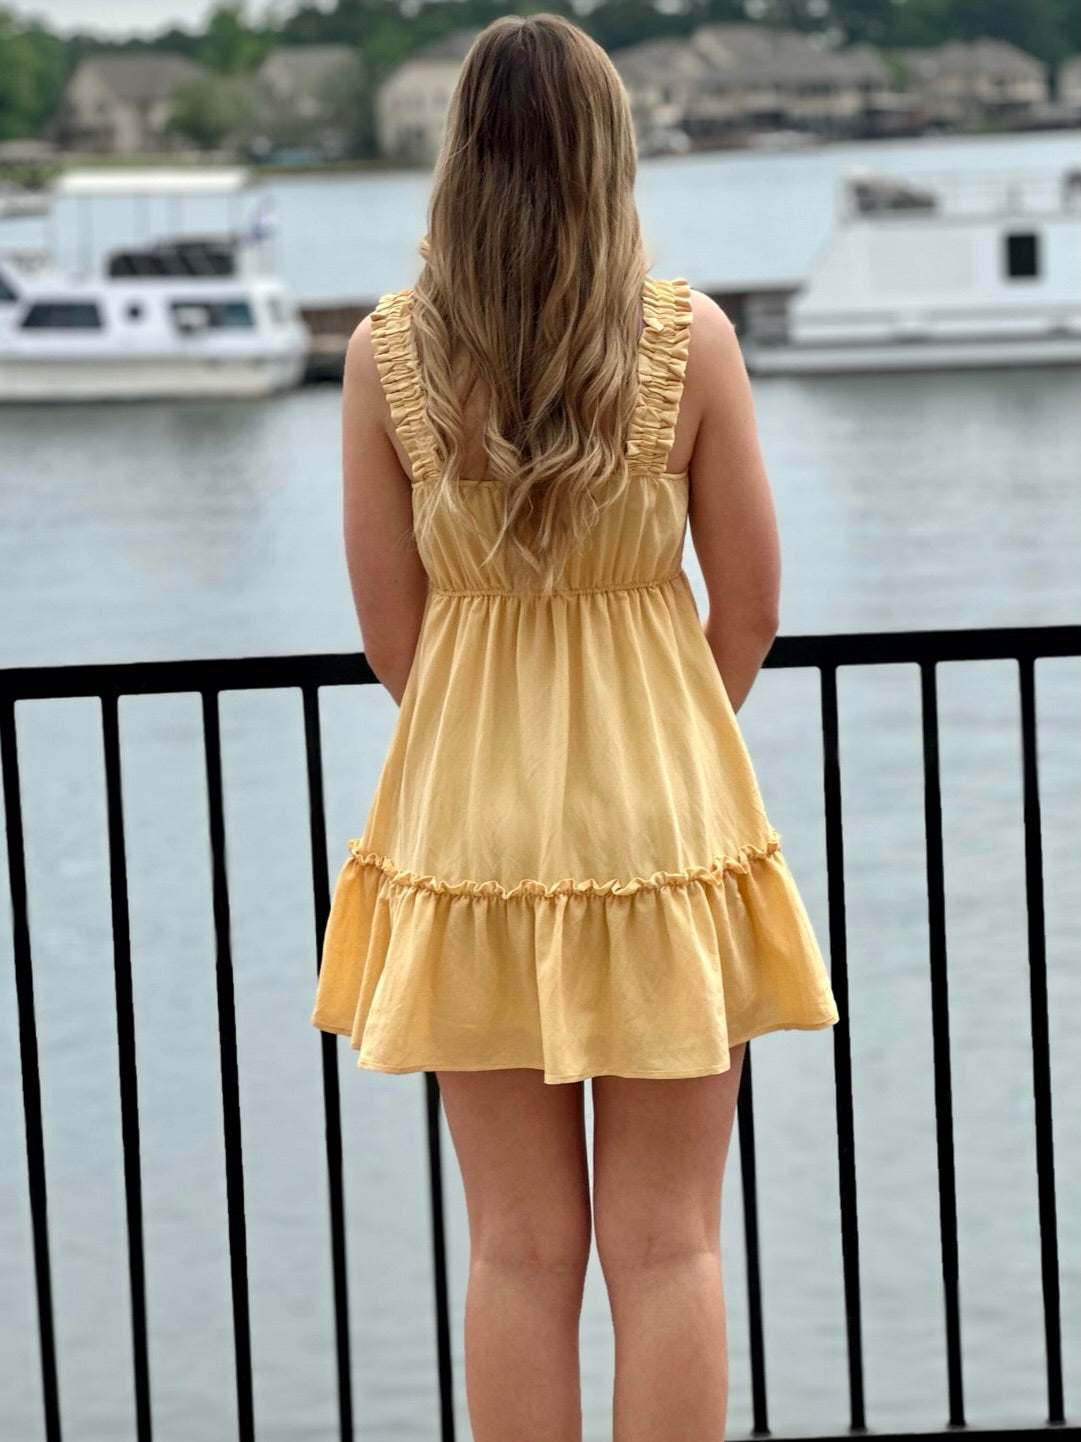 Lexi in yellow dress back view